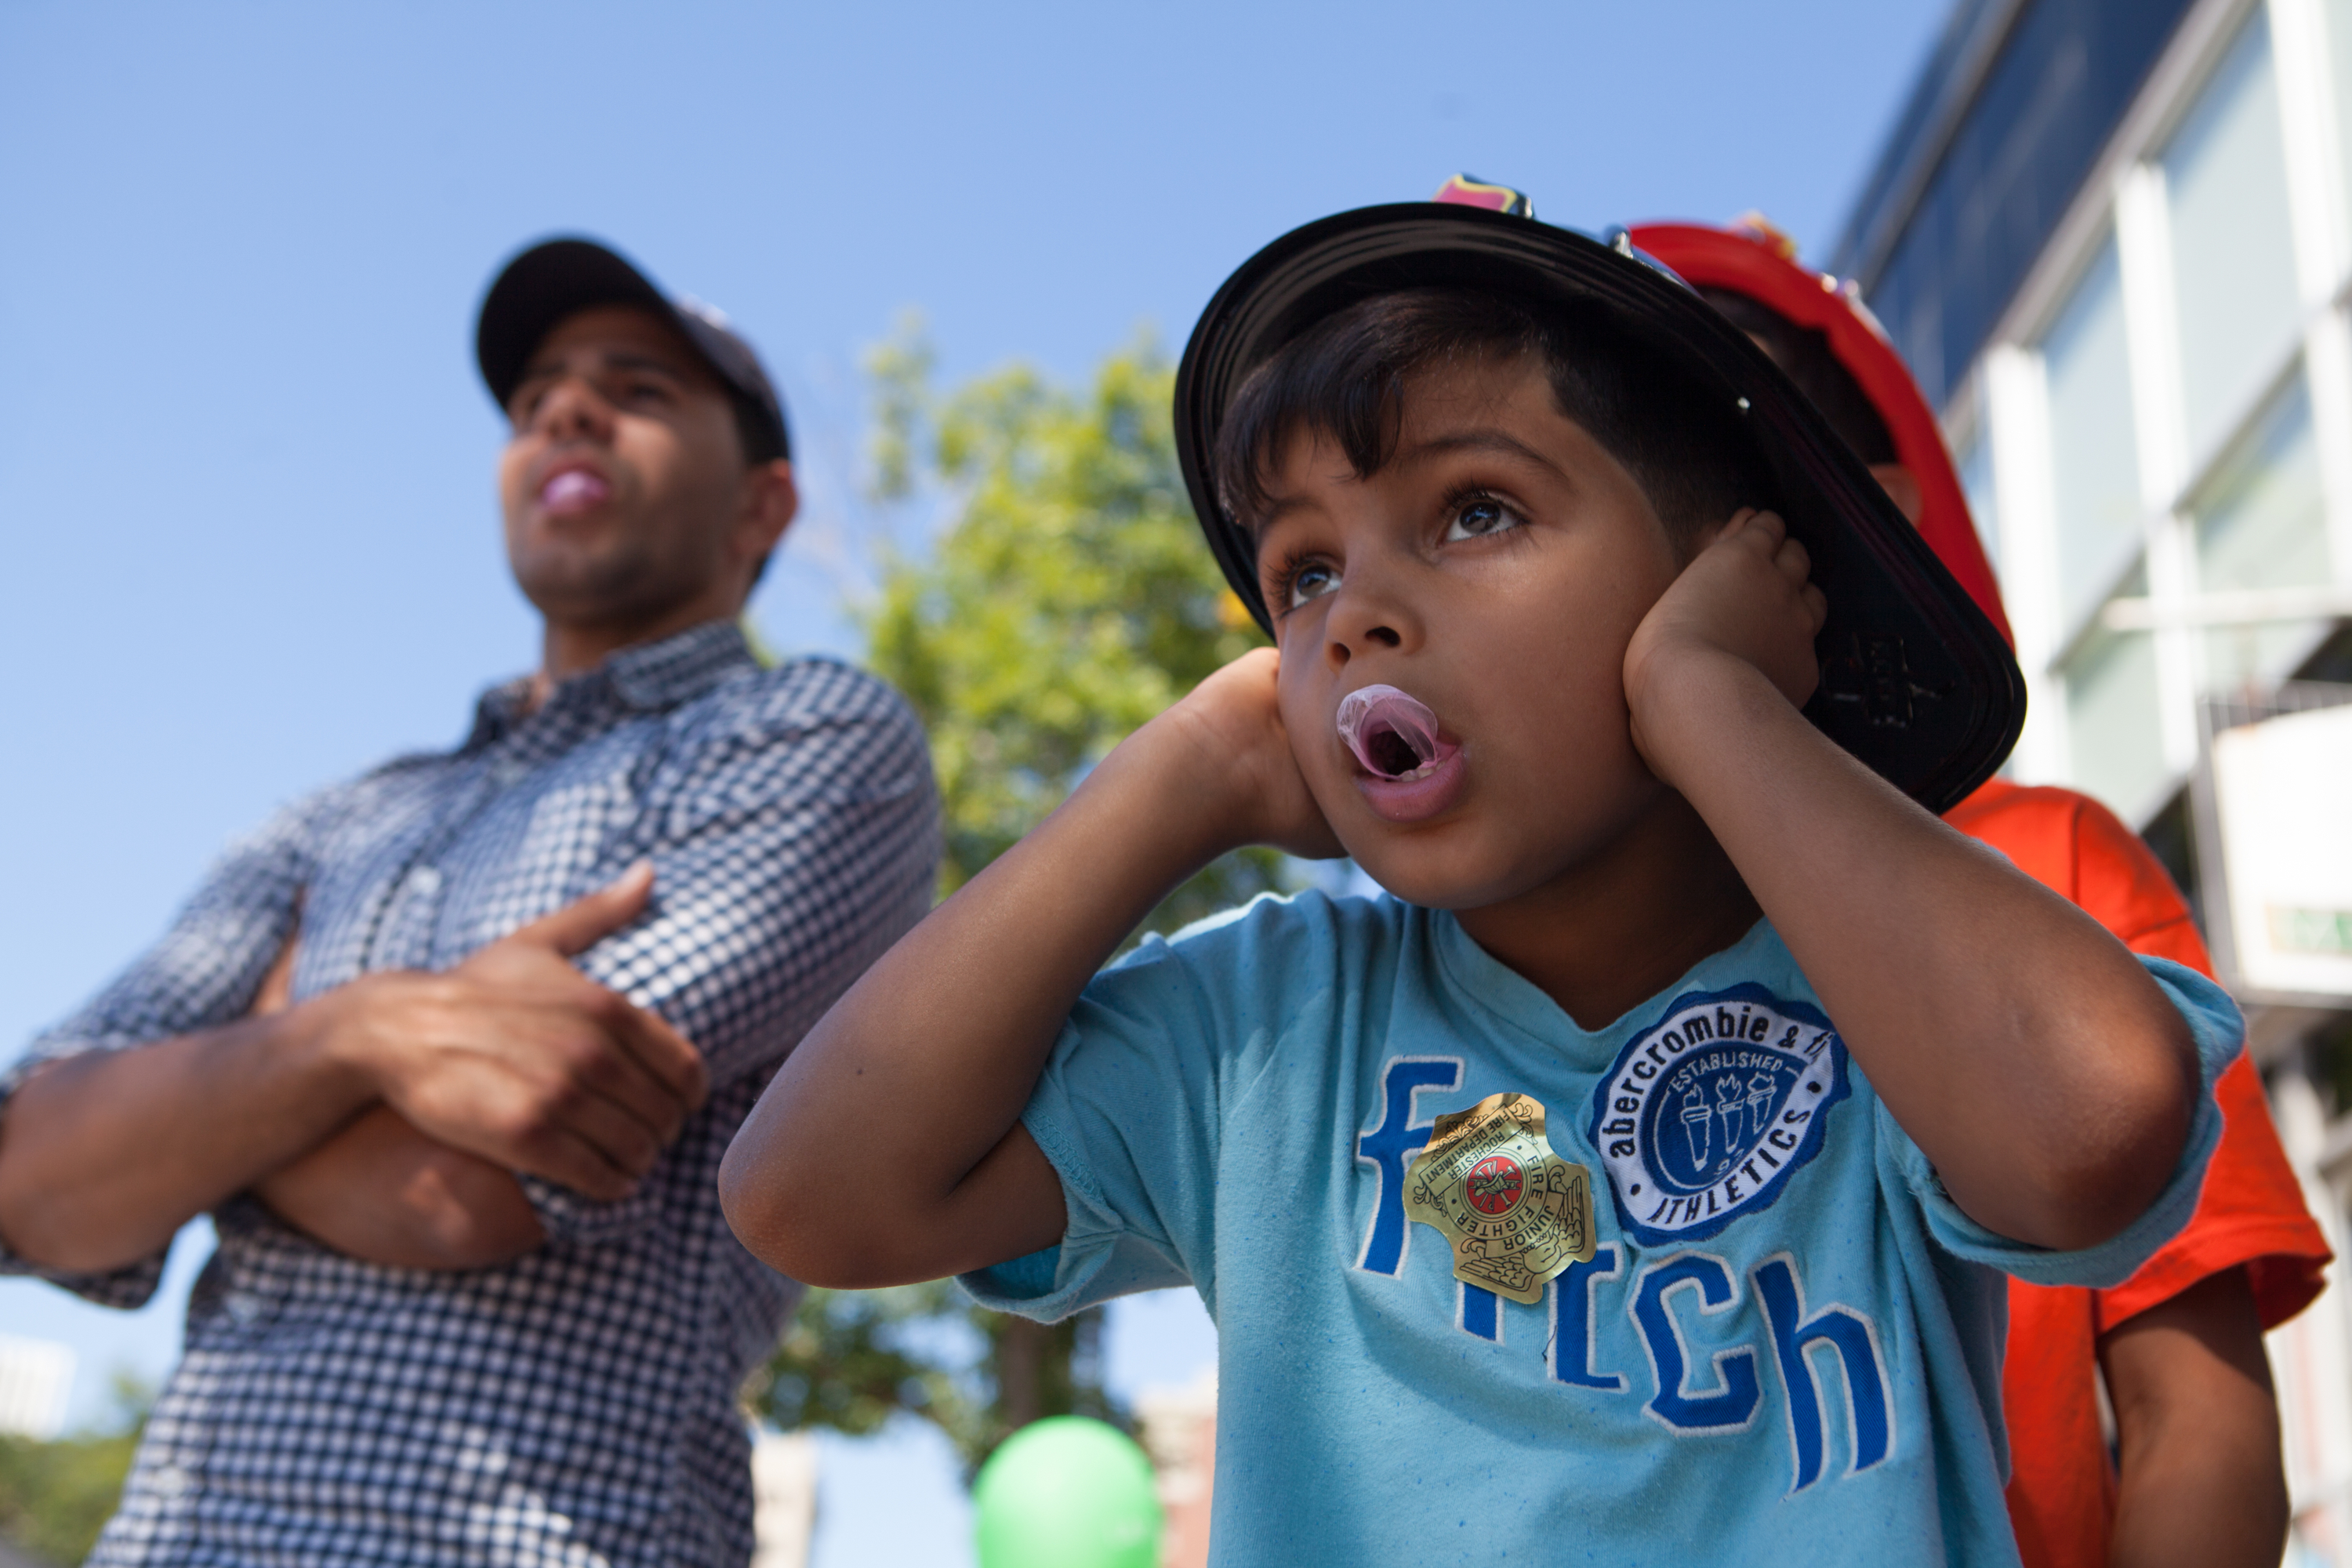 Jahdiel Marrero, 8, of Rochester, covers his ears as fire trucks blare their horns during the annual Rochester Labor Day parade along East Avenue in Rochester, N.Y., on Sept. 5, 2016. The parade featured union workers, public officials, and local first responders, among others.